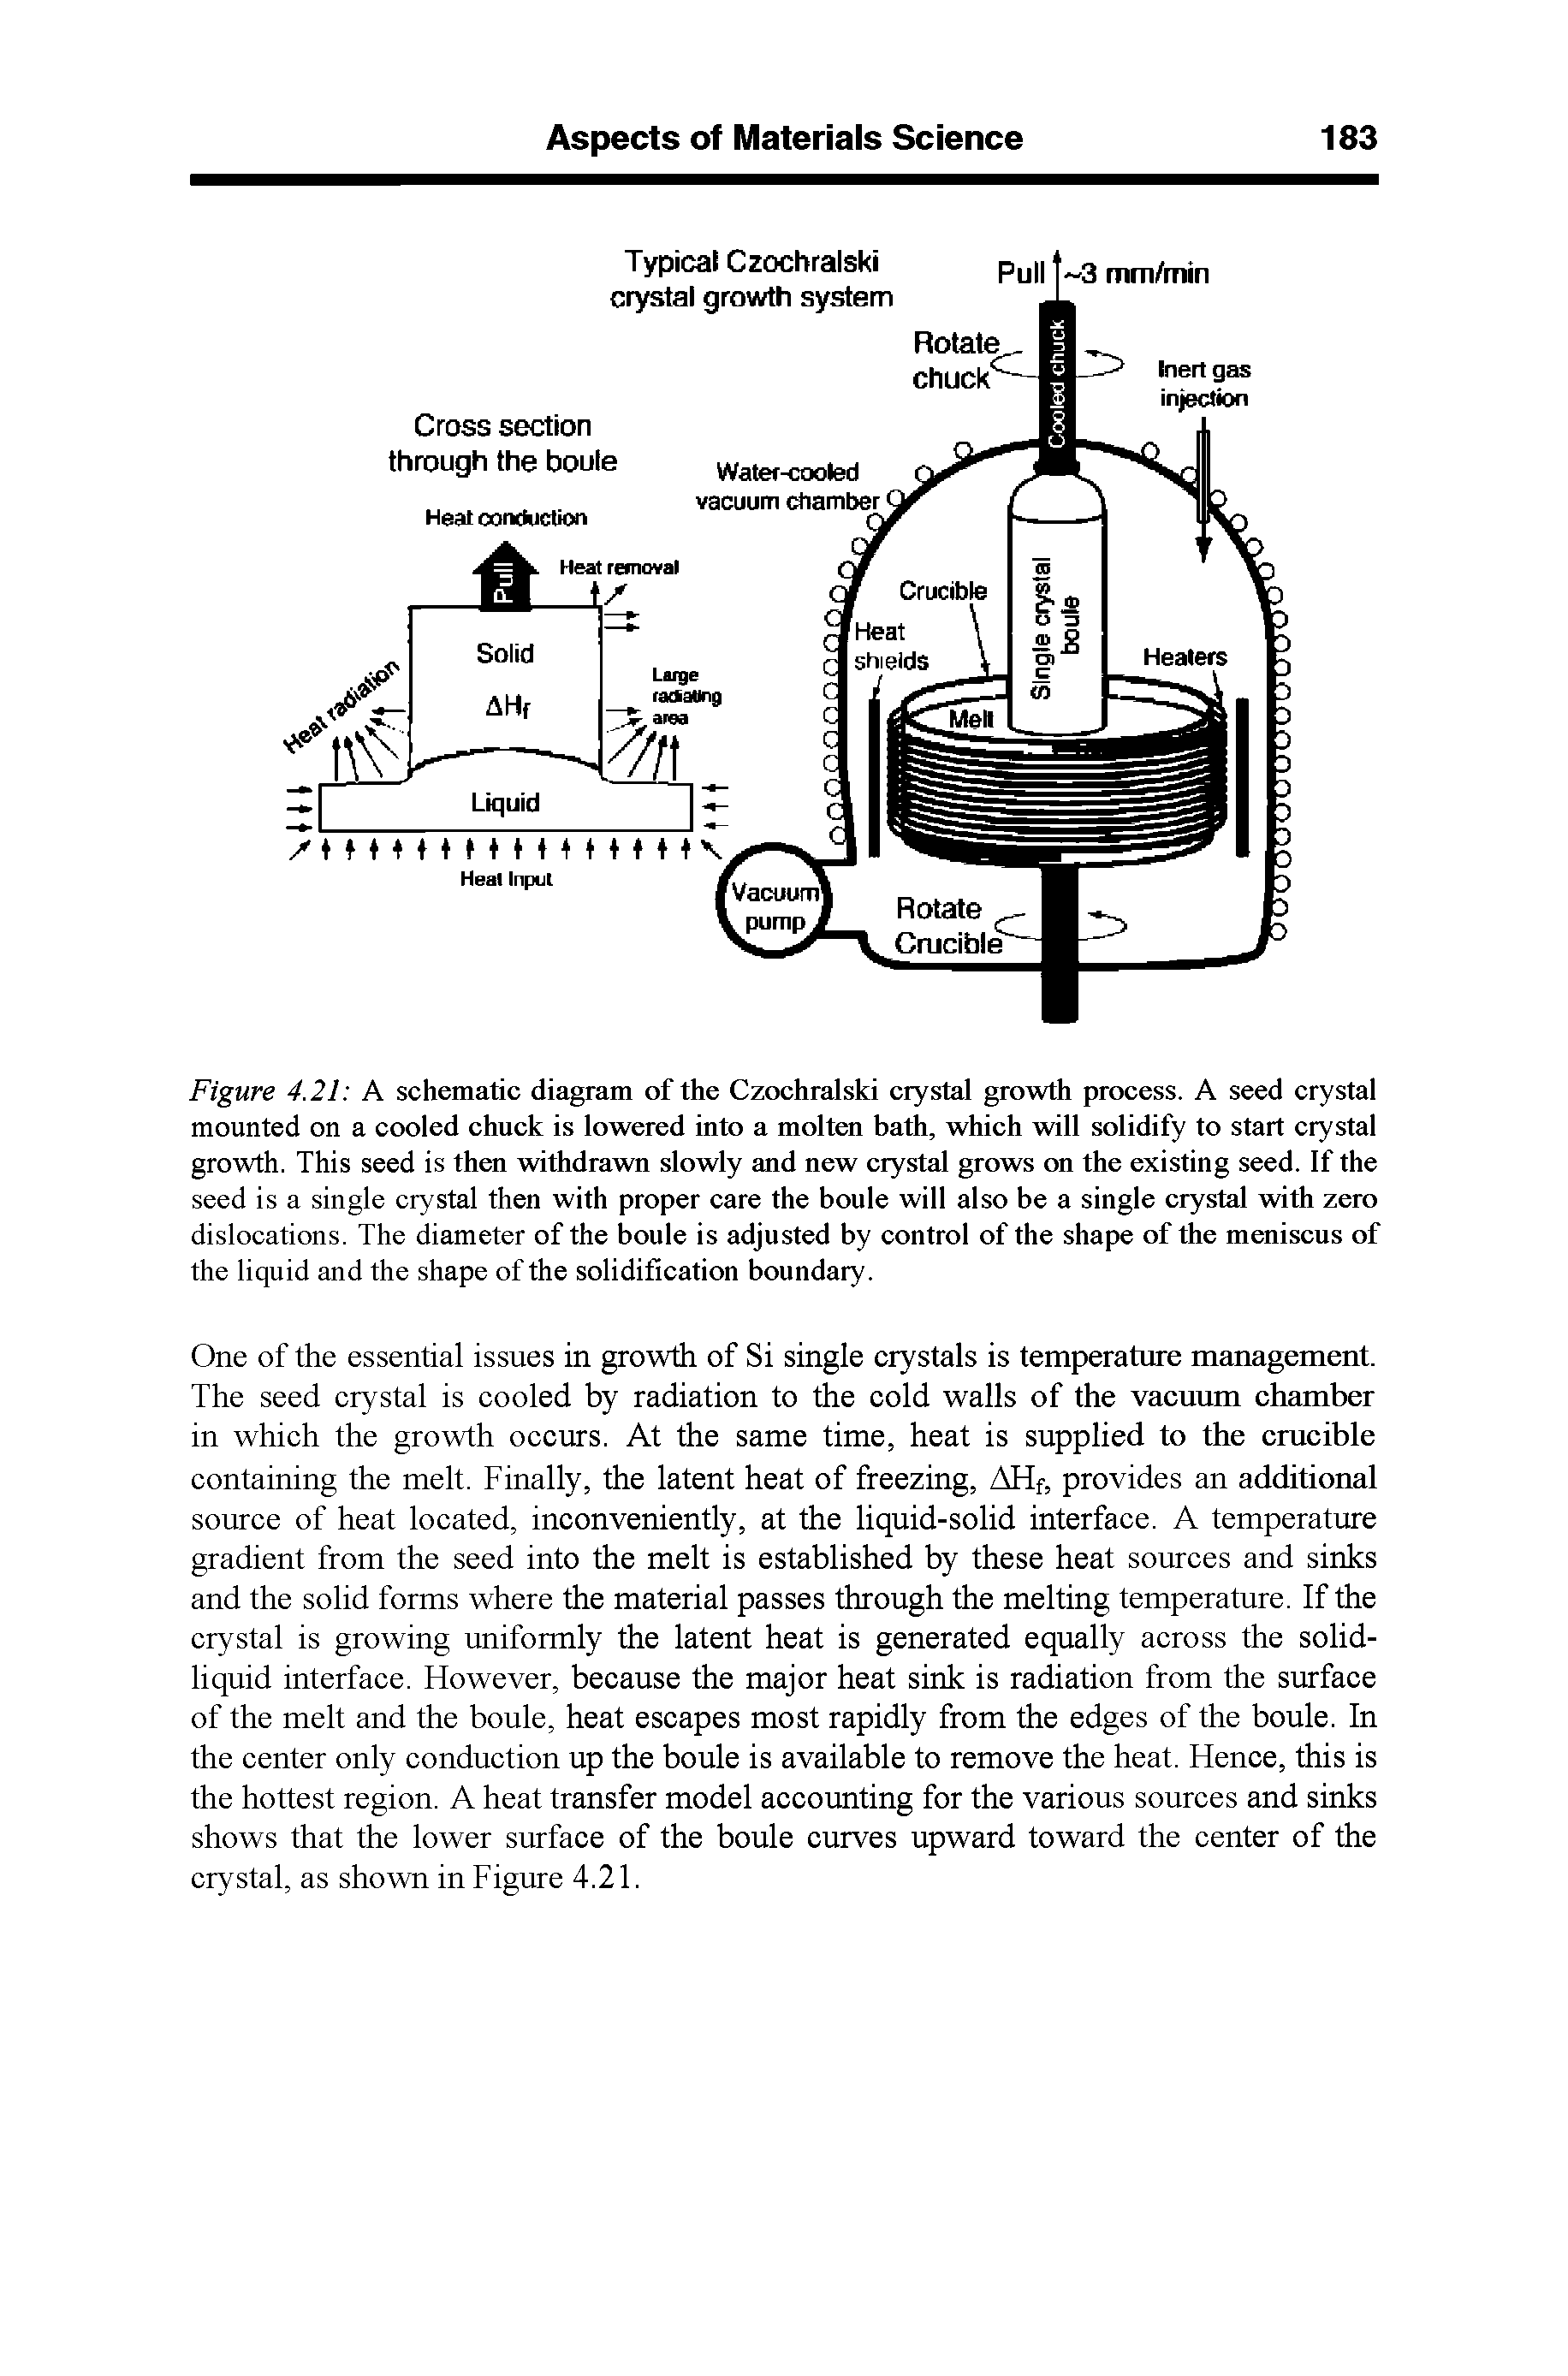 Figure 4.21 A schematic diagram of the Czochralski crystal growth process. A seed crystal mounted on a cooled chuck is lowered into a molten bath, which will solidify to start crystal growth. This seed is then withdrawn slowly and new crystal grows on the existing seed. If the seed is a single crystal then with proper care the boule will also be a single crystal with zero dislocations. The diameter of the boule is adjusted by control of the shape of the meniscus of the liquid and the shape of the solidification boundary.